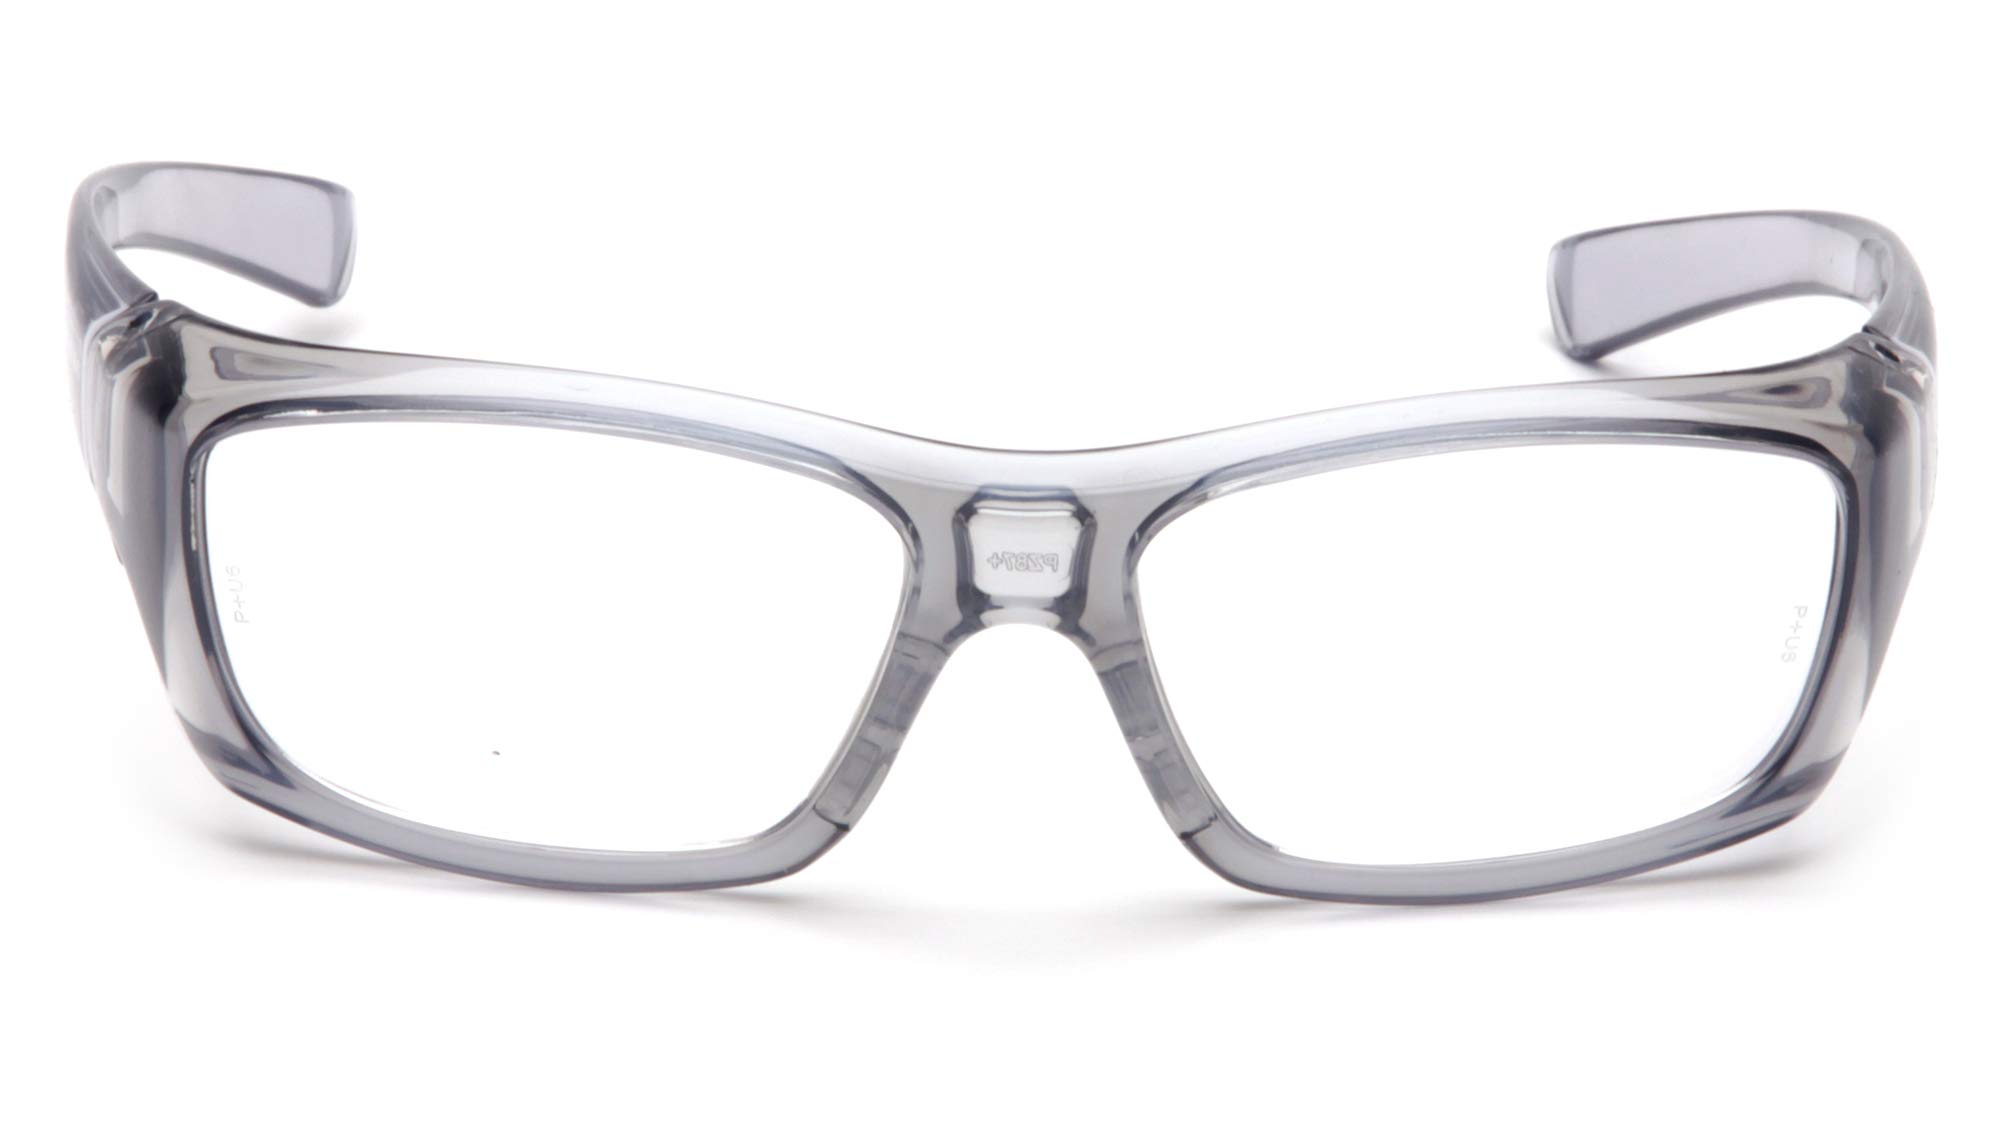 PYRAMEX SG7910D15 Pyramex Clear Safety Reader Glasses, Scratch-Resistant,Gray Frame